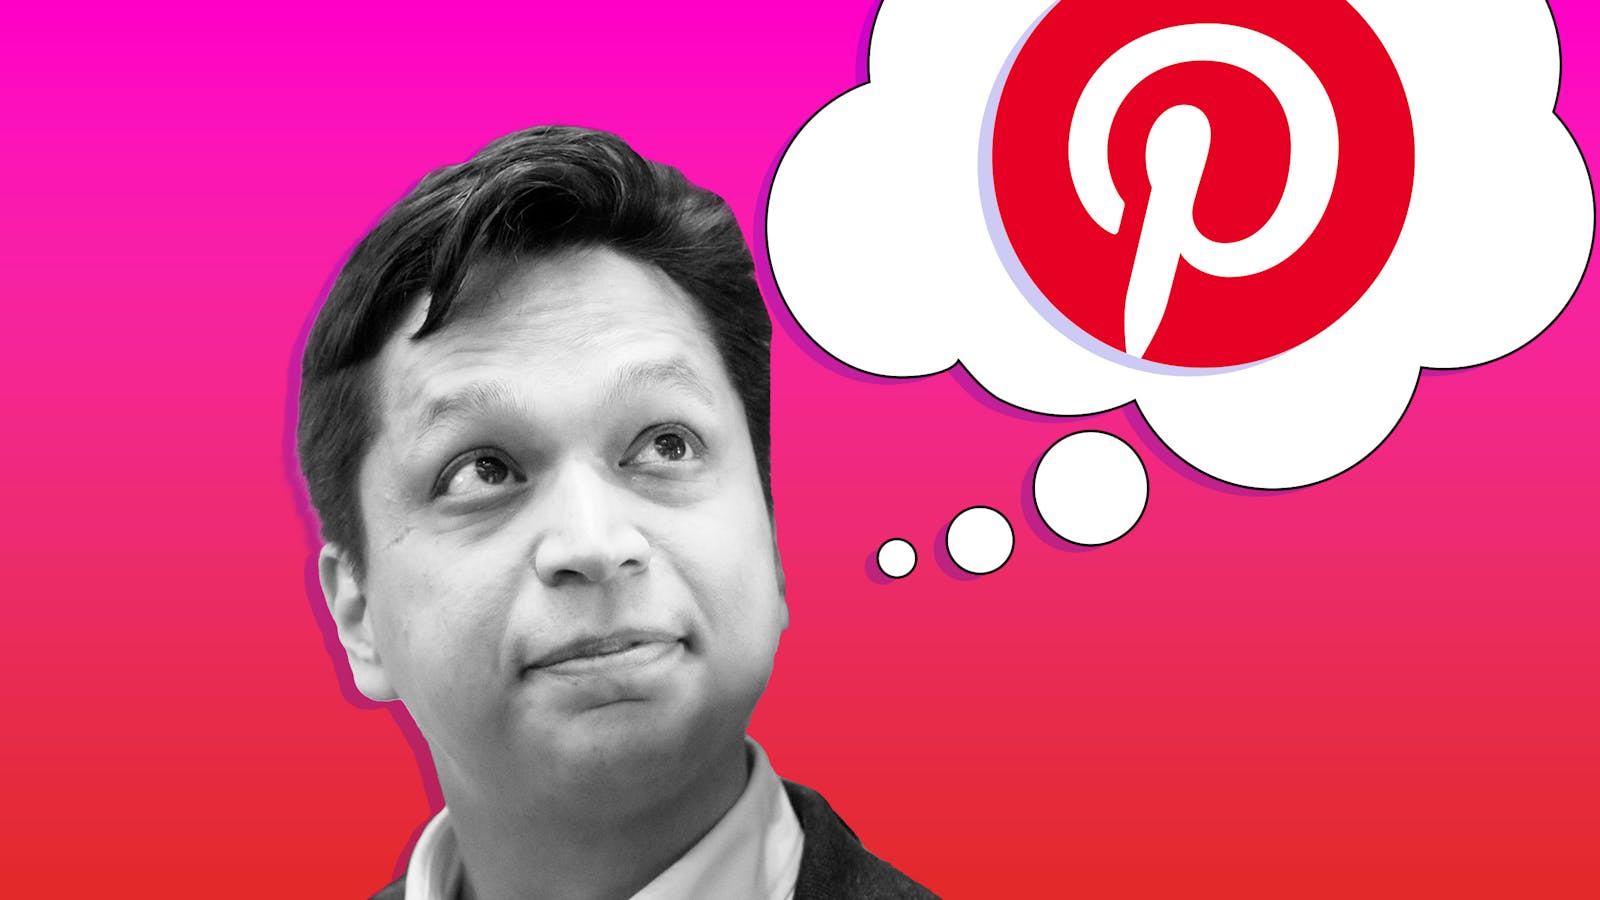 Ben Silbermann, co-founder and CEO of Pinterest. Photo by Bloomberg; Art by Mike Sullivan